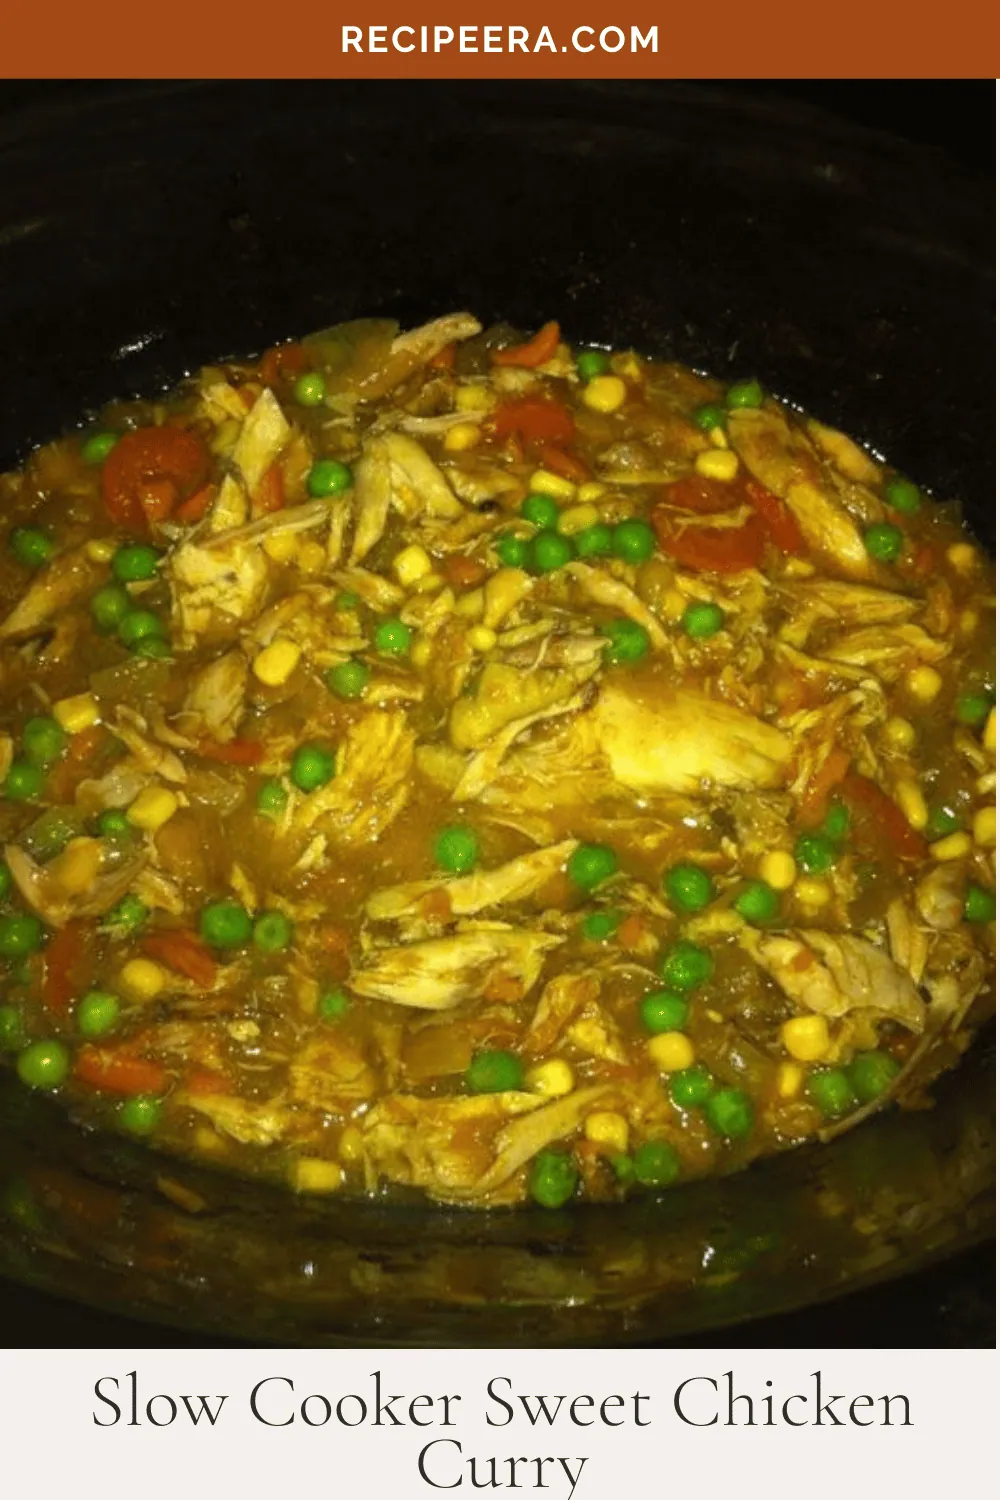 Slow Cooker Sweet Chicken Curry